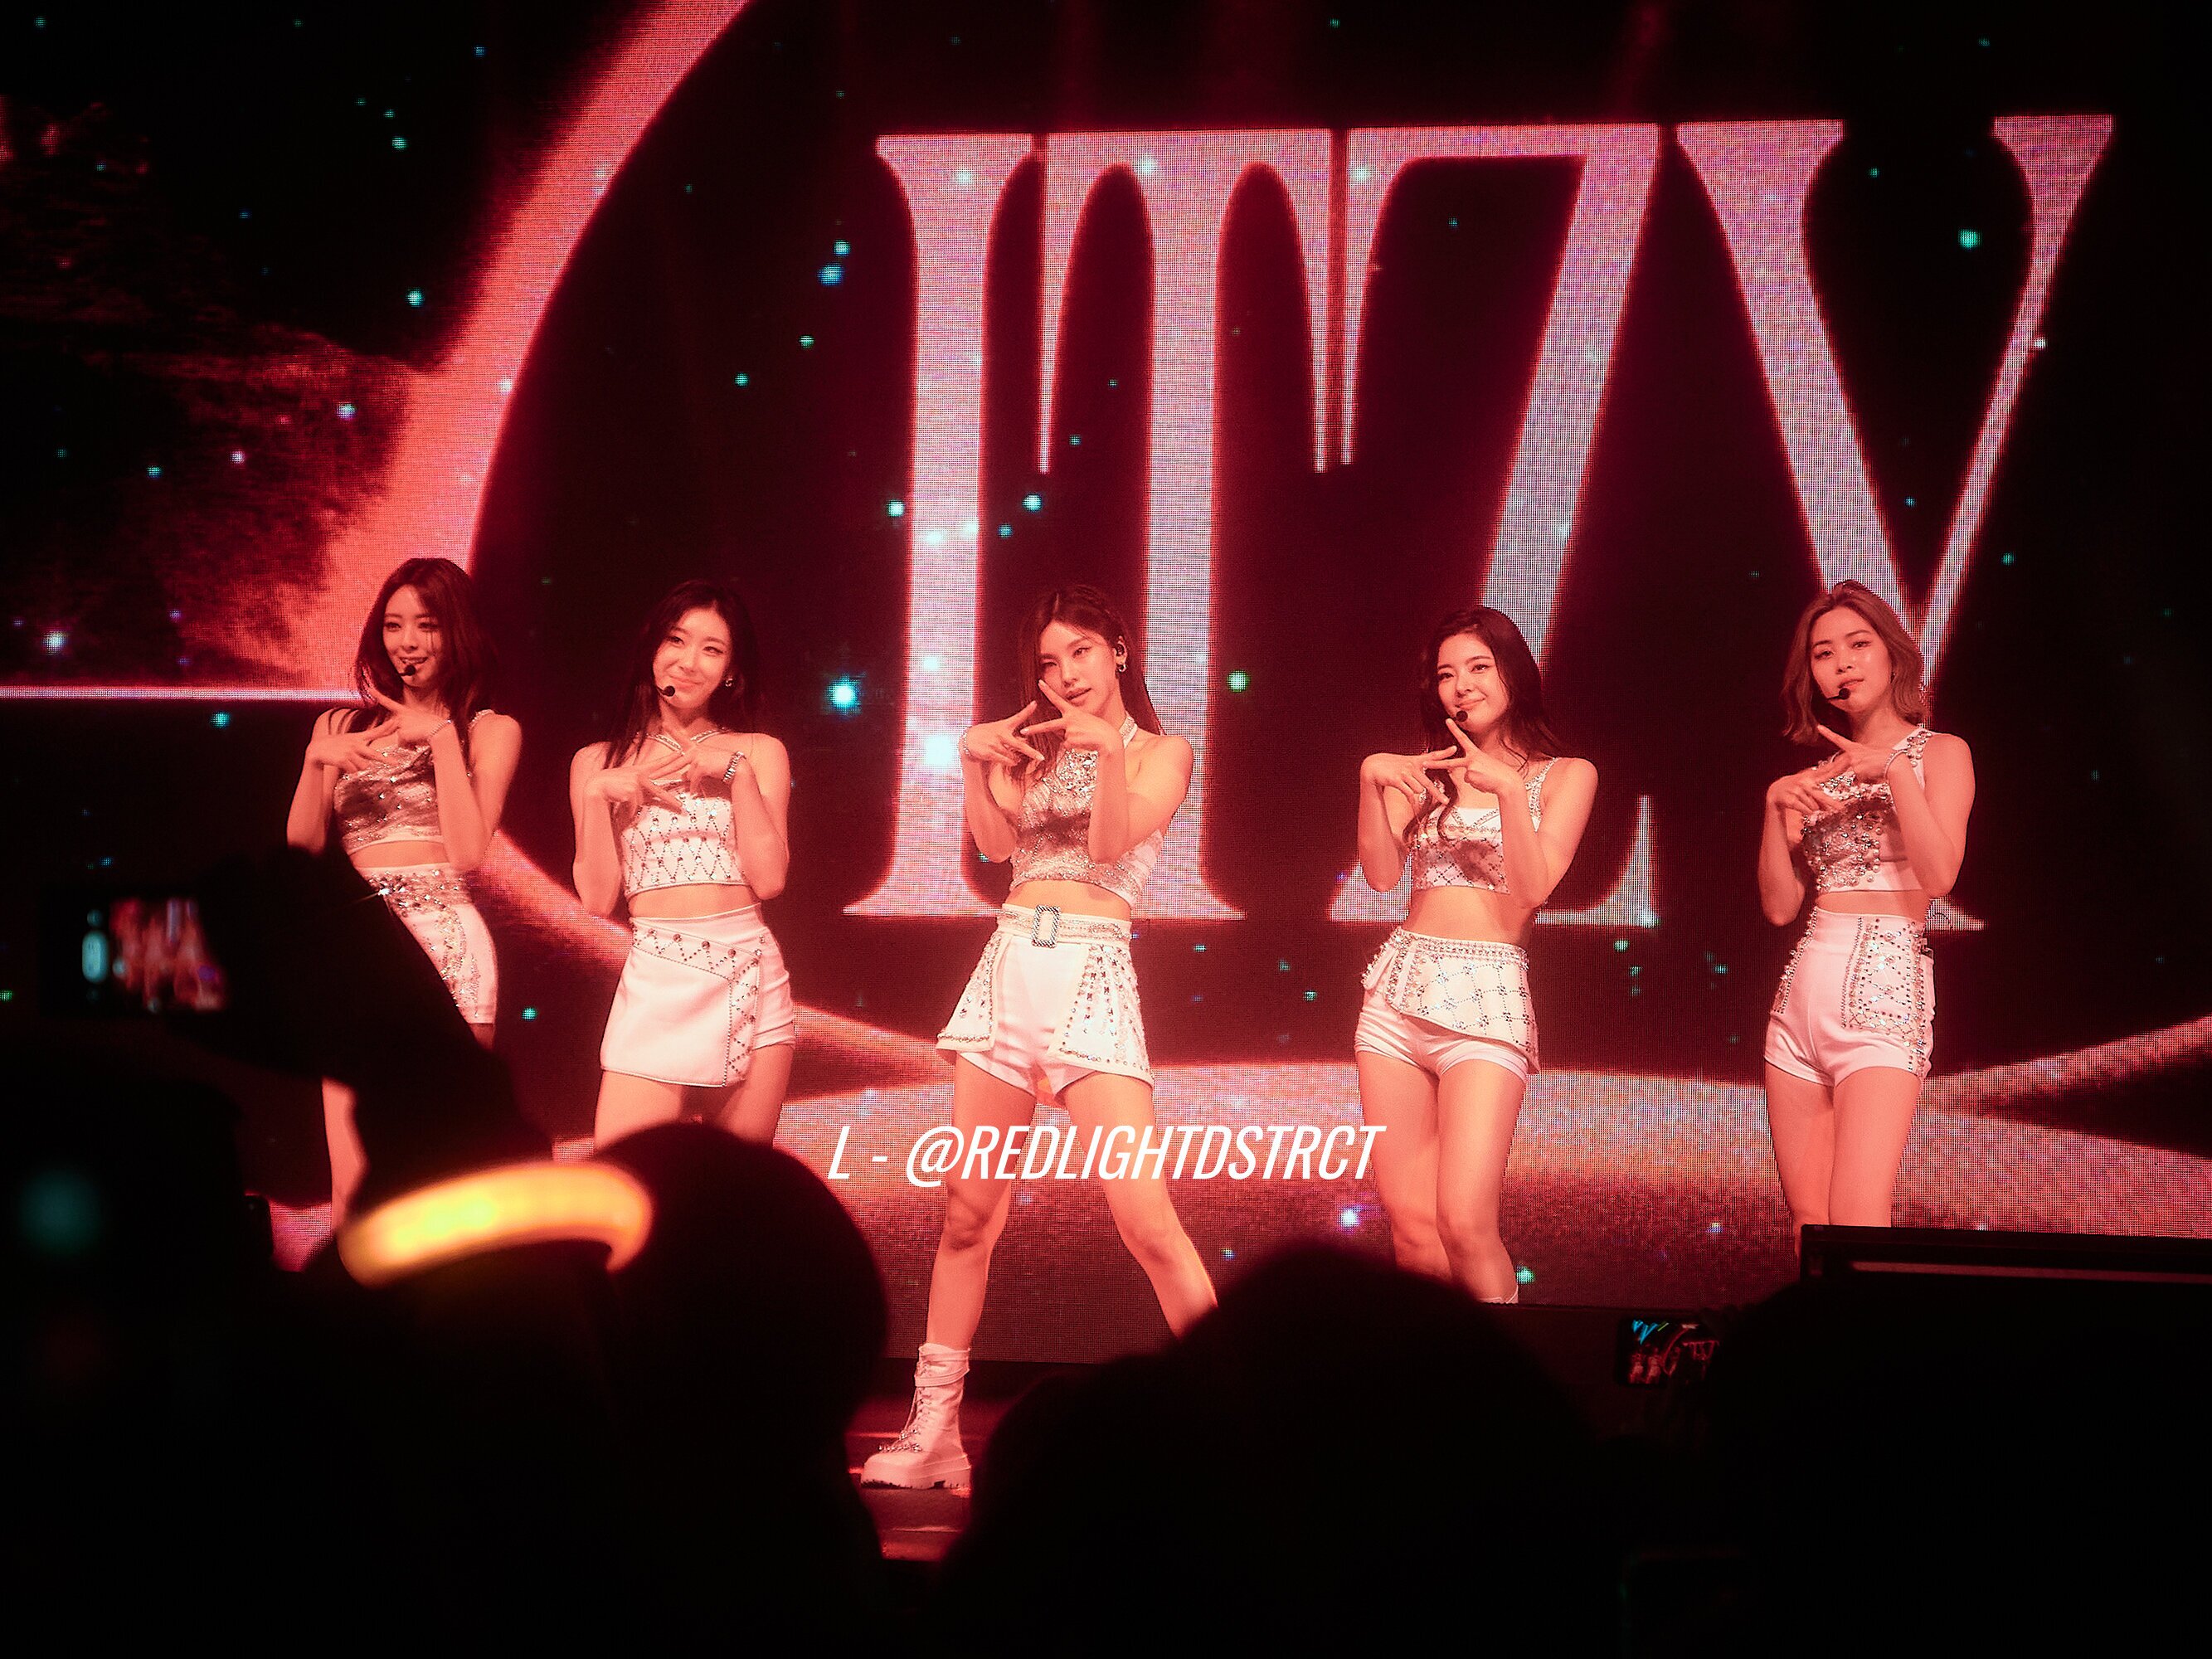 ITZY Checkmate in NYC @Hulu Theater (221113) 